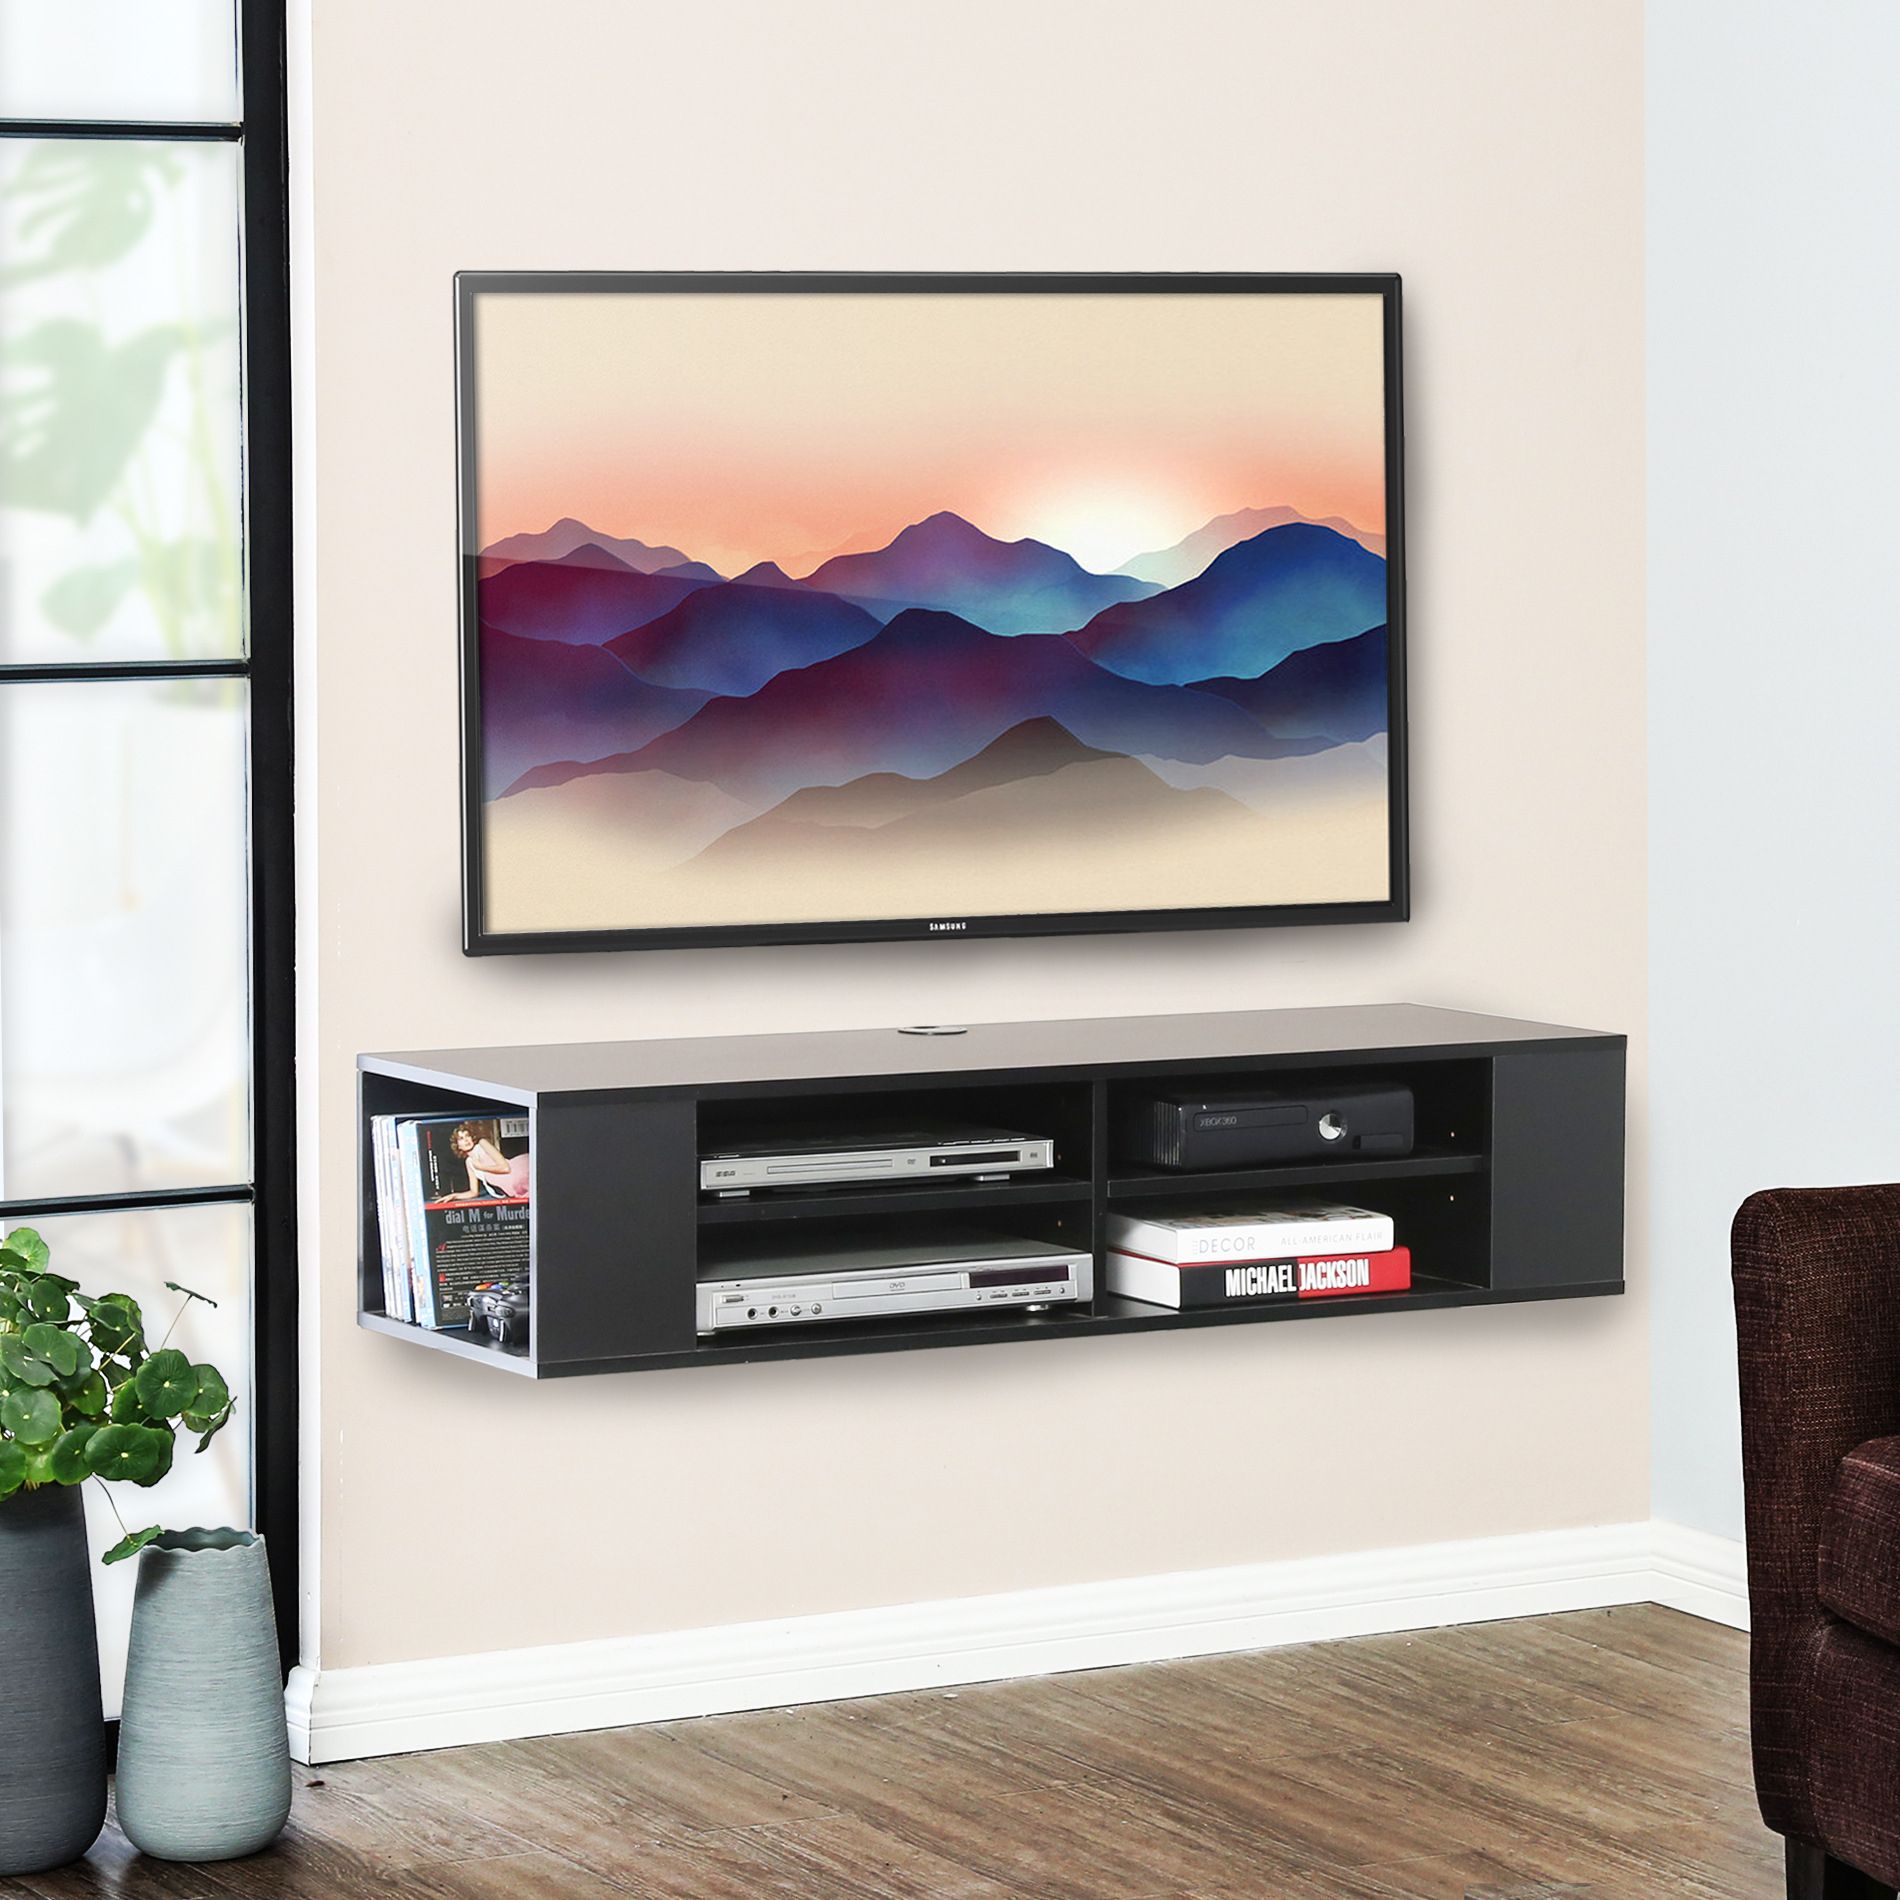 Fitueyes Black Wall Mounted Media Console Floating Tv Pertaining To Tv Mounts And Shelves (View 11 of 15)